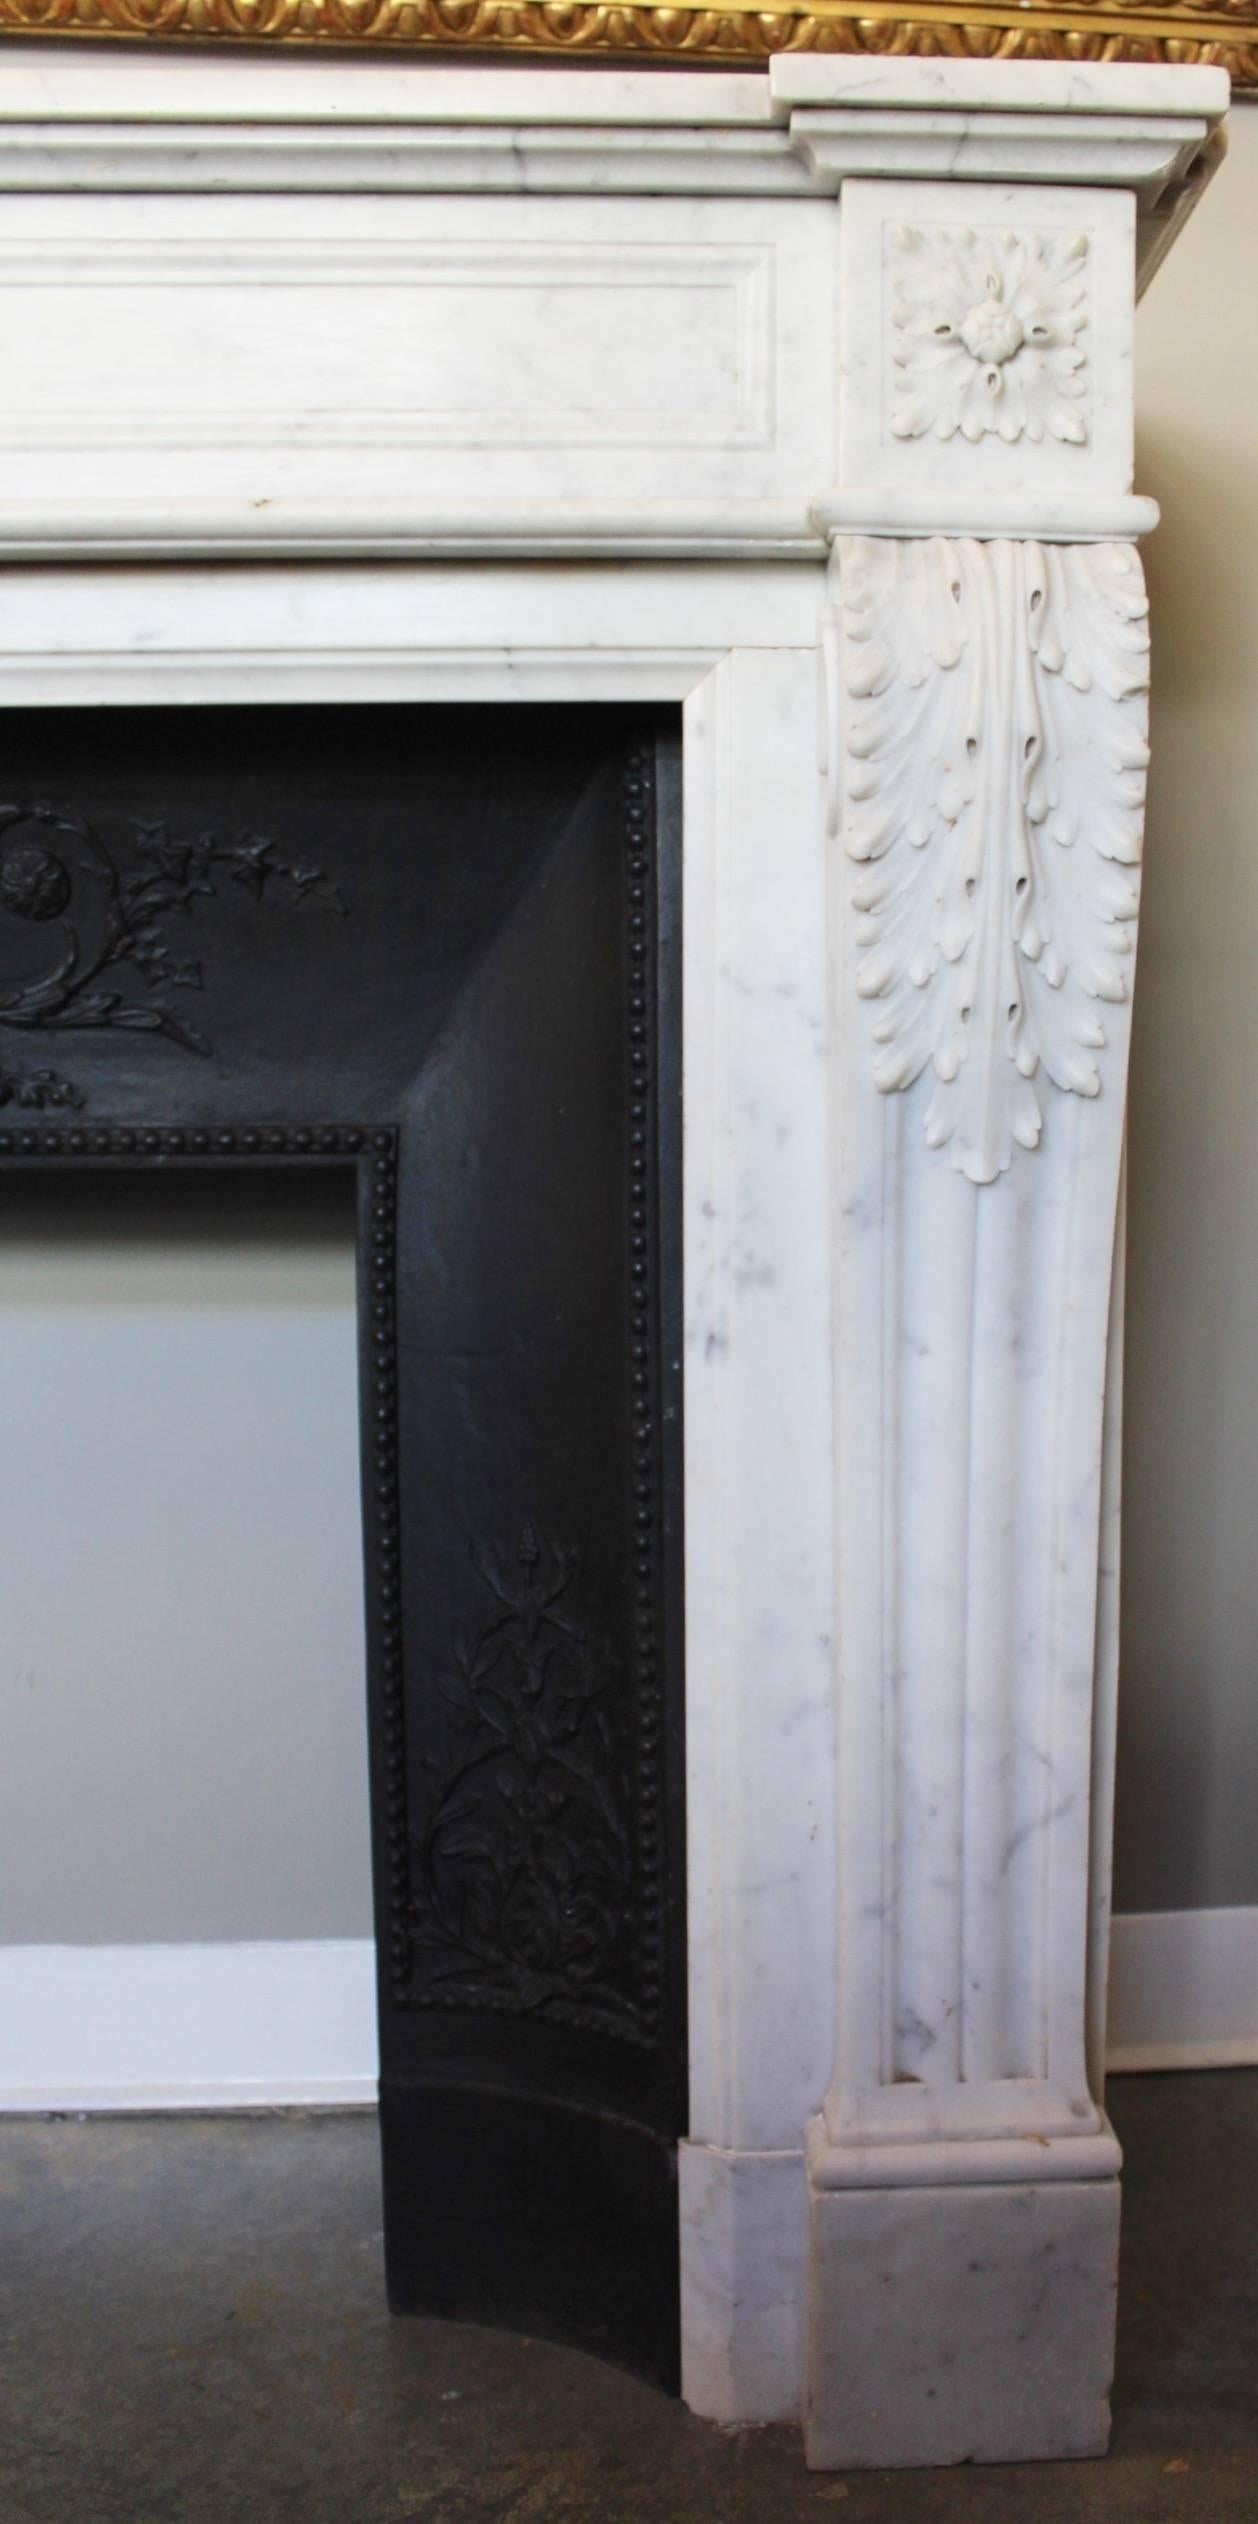 Supremely elegant antique fireplace mantel in white Carrara marble, the quality of the sculptures is enhanced by the starkness of the Carrera. Large carved Acanthus leaves are covering the top of the arched jambs resting on fluted console feet that